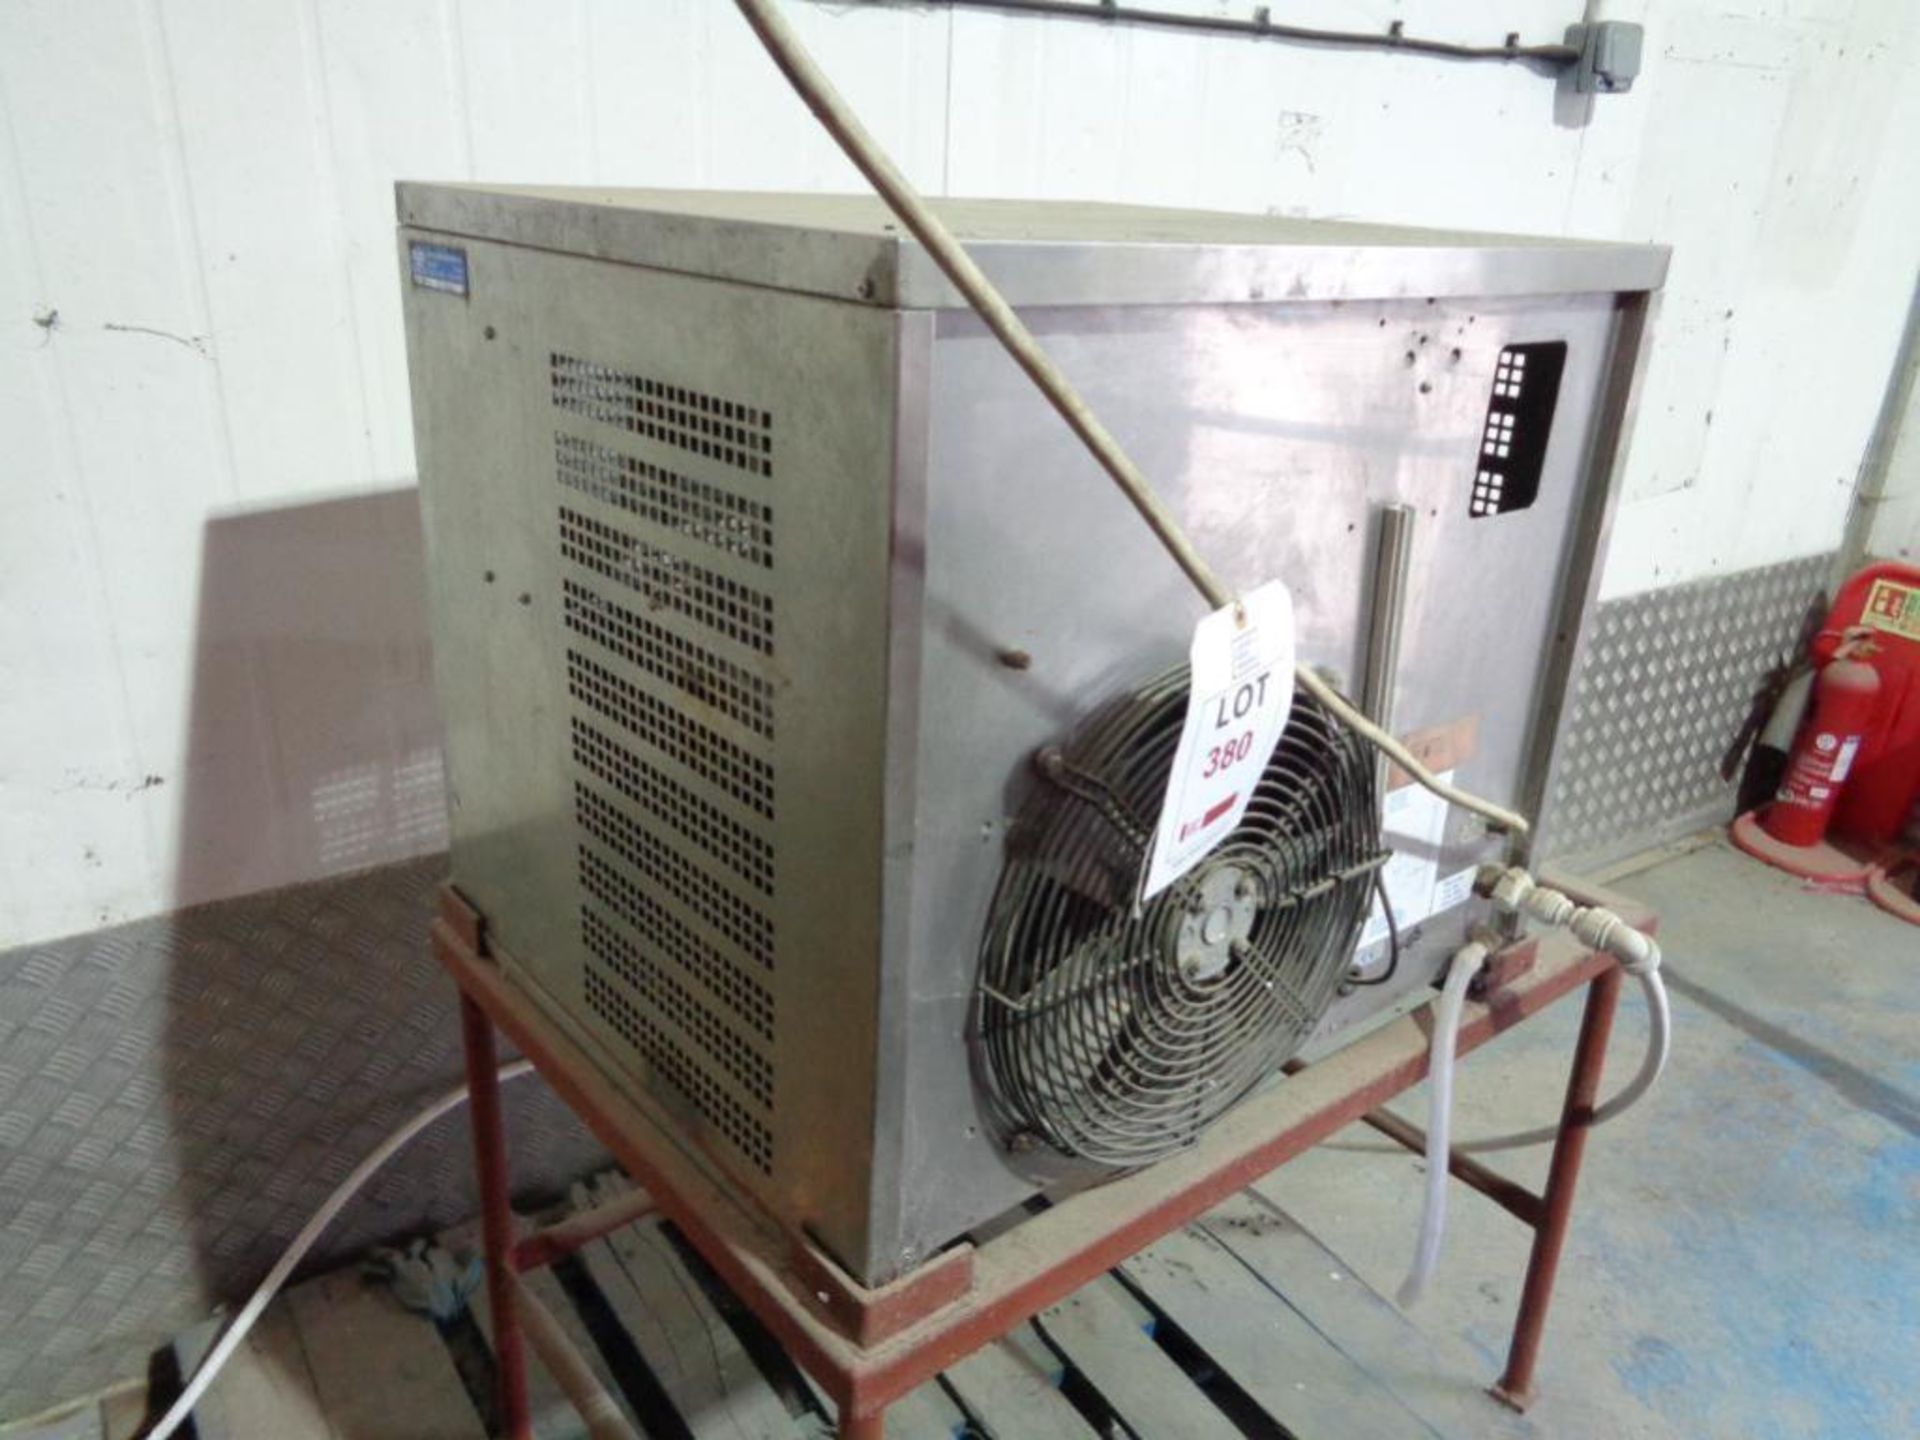 Ziegra ZBE350 stainless steel ice machine mounted on stand